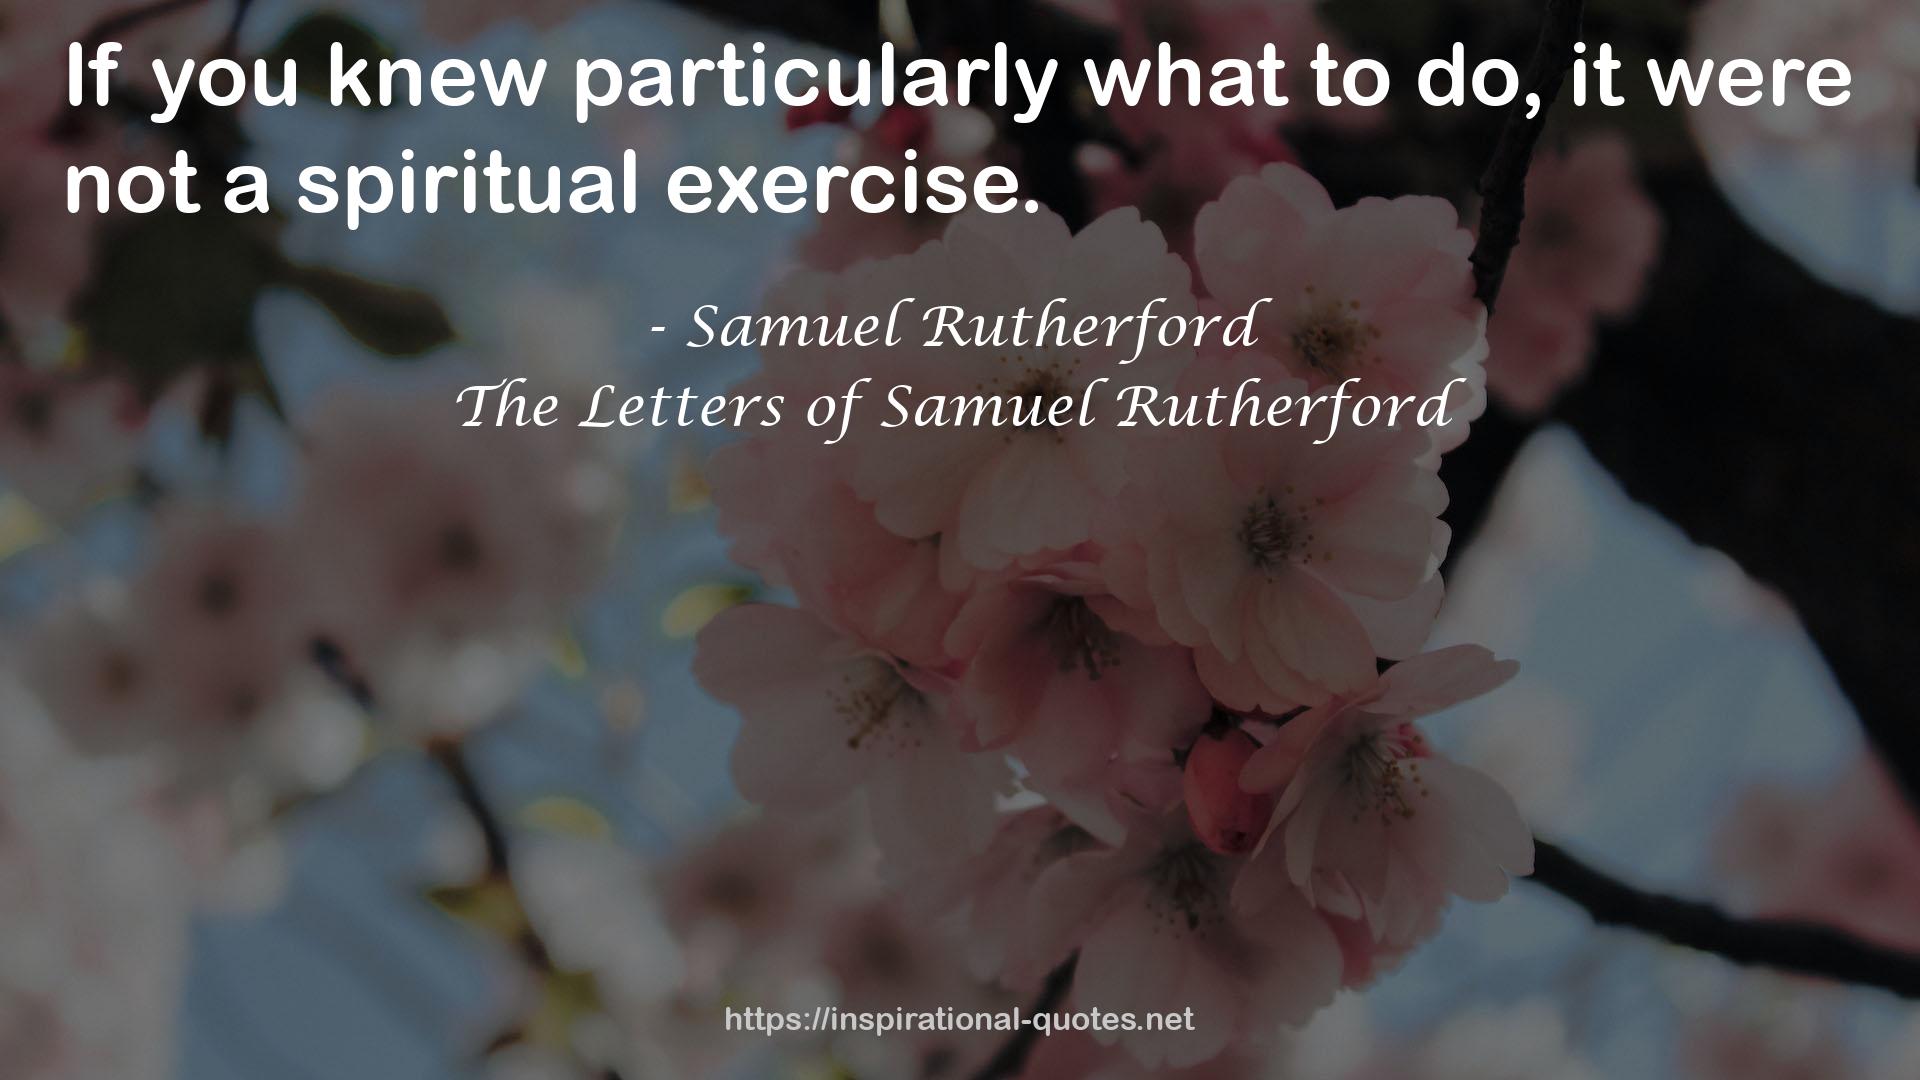 The Letters of Samuel Rutherford QUOTES